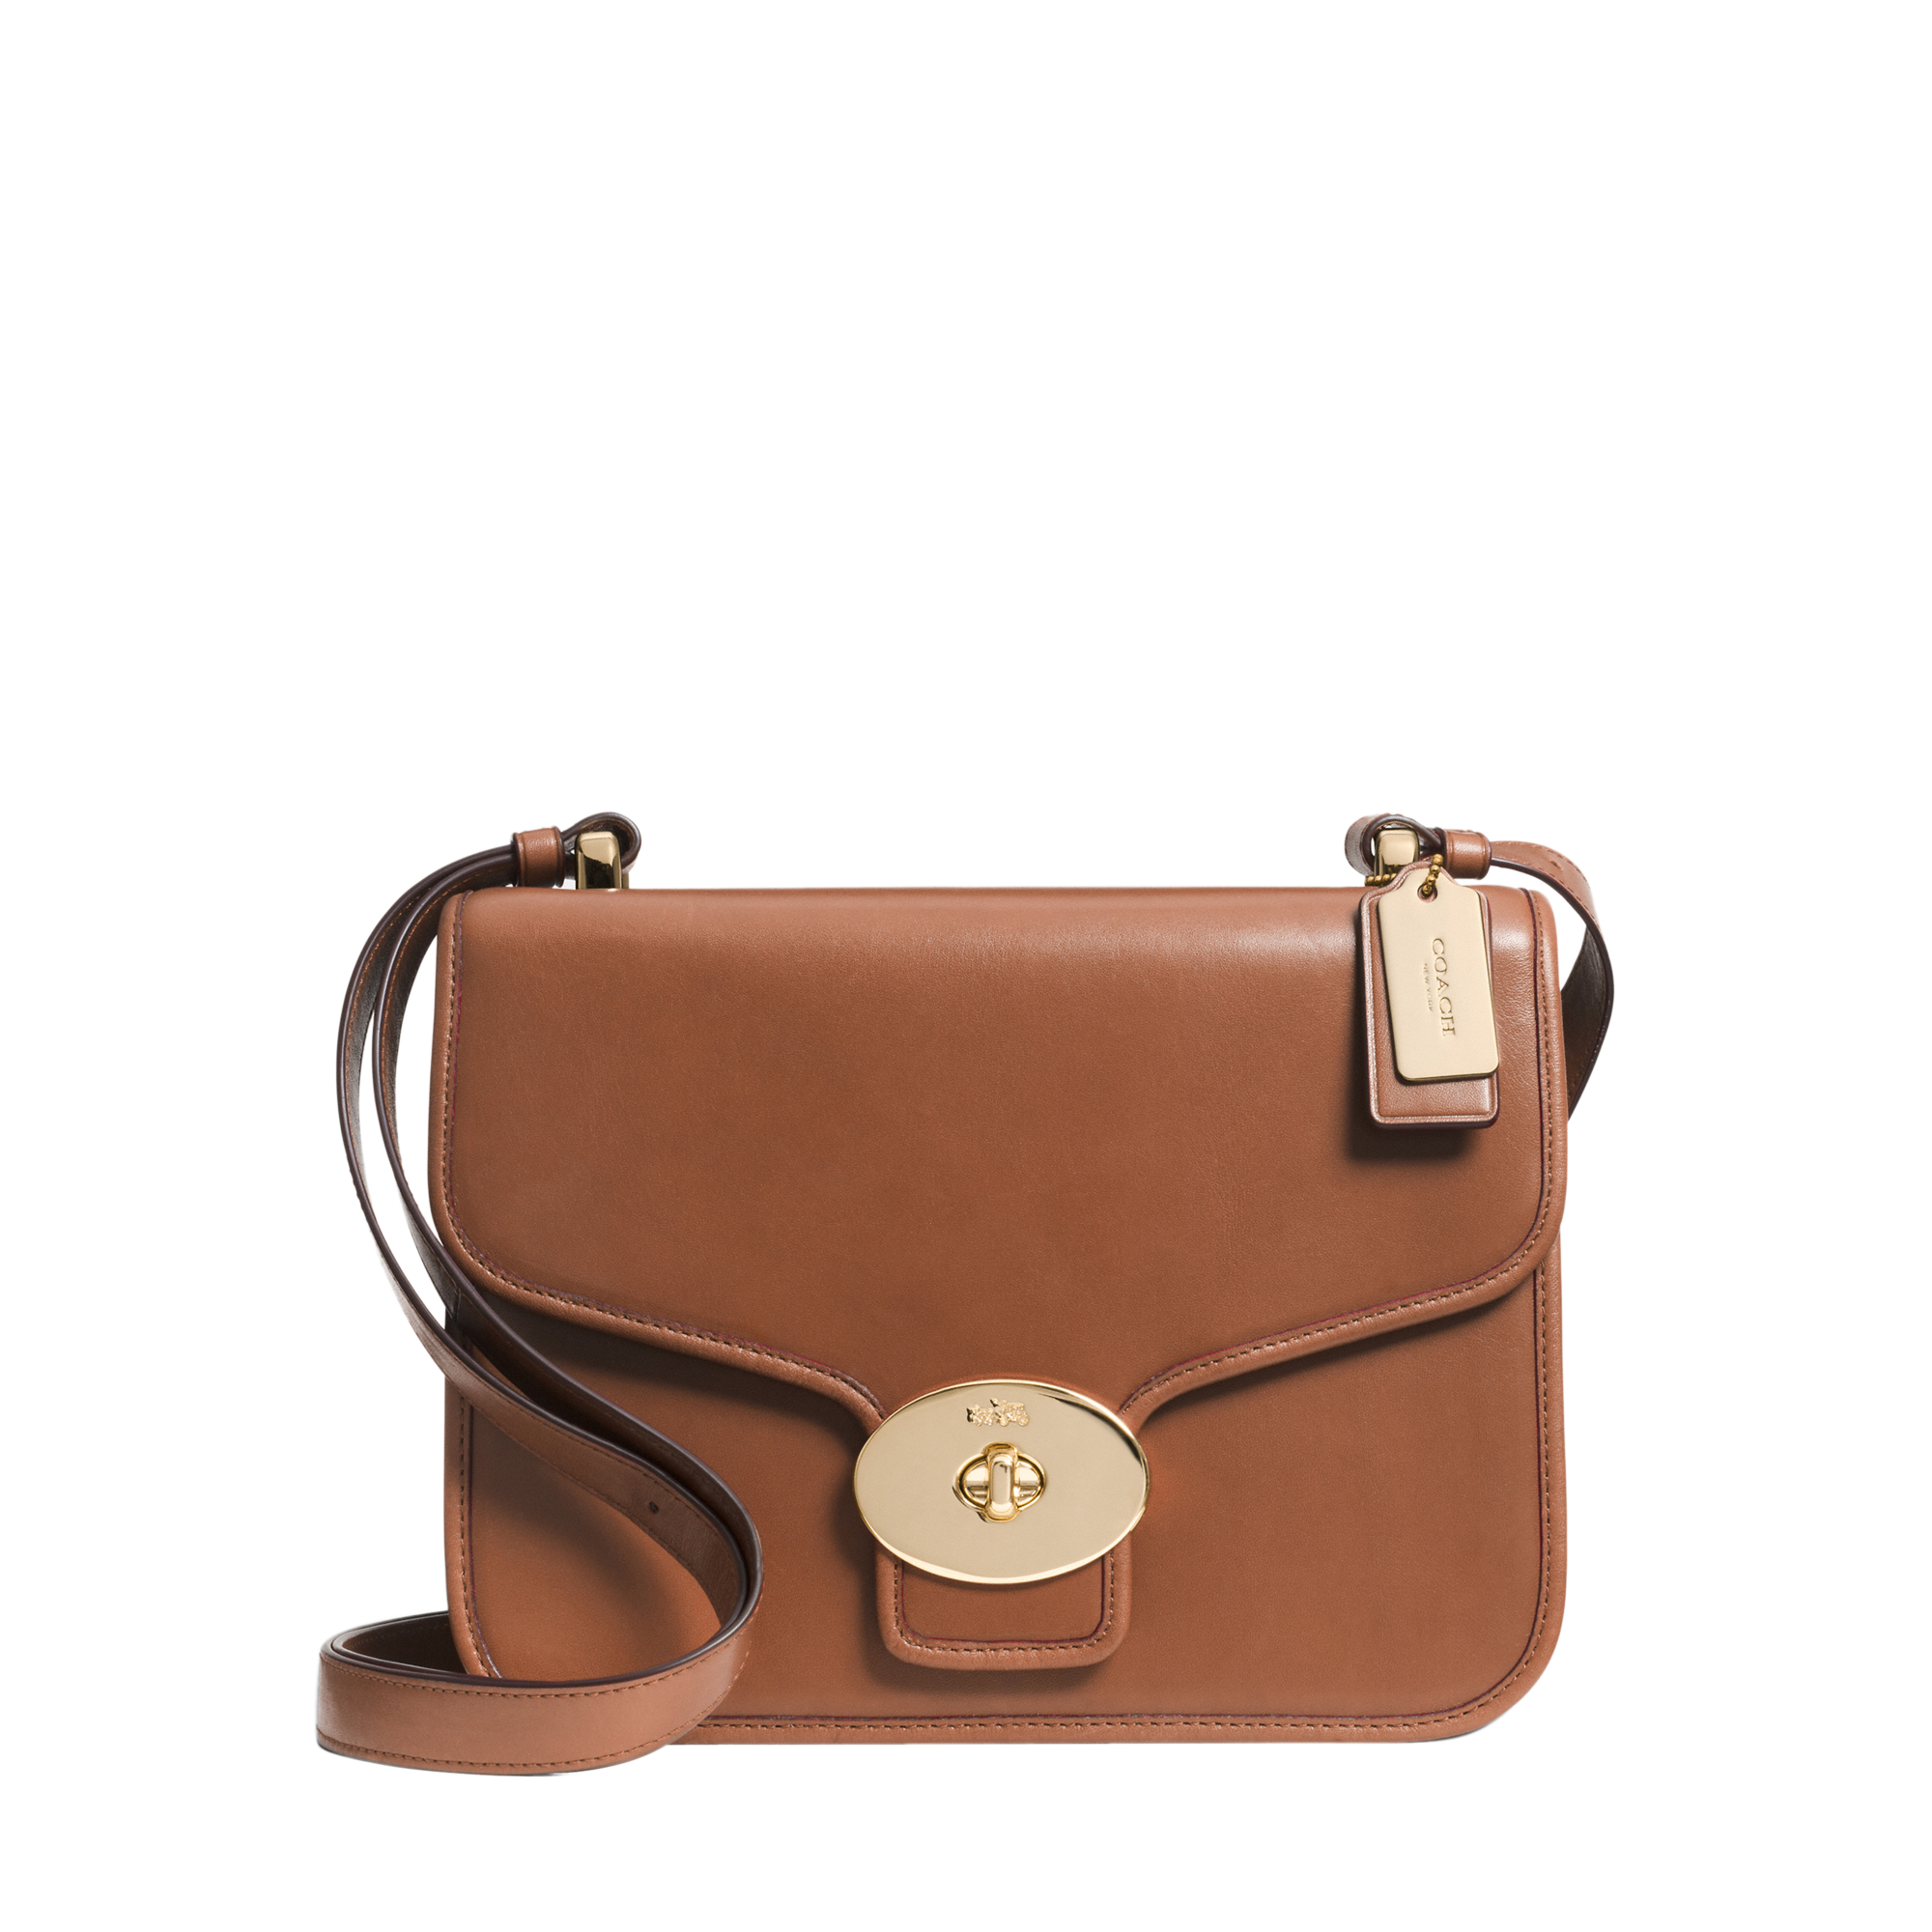 COACH Page Shoulder Flap Bag in Brown - Lyst